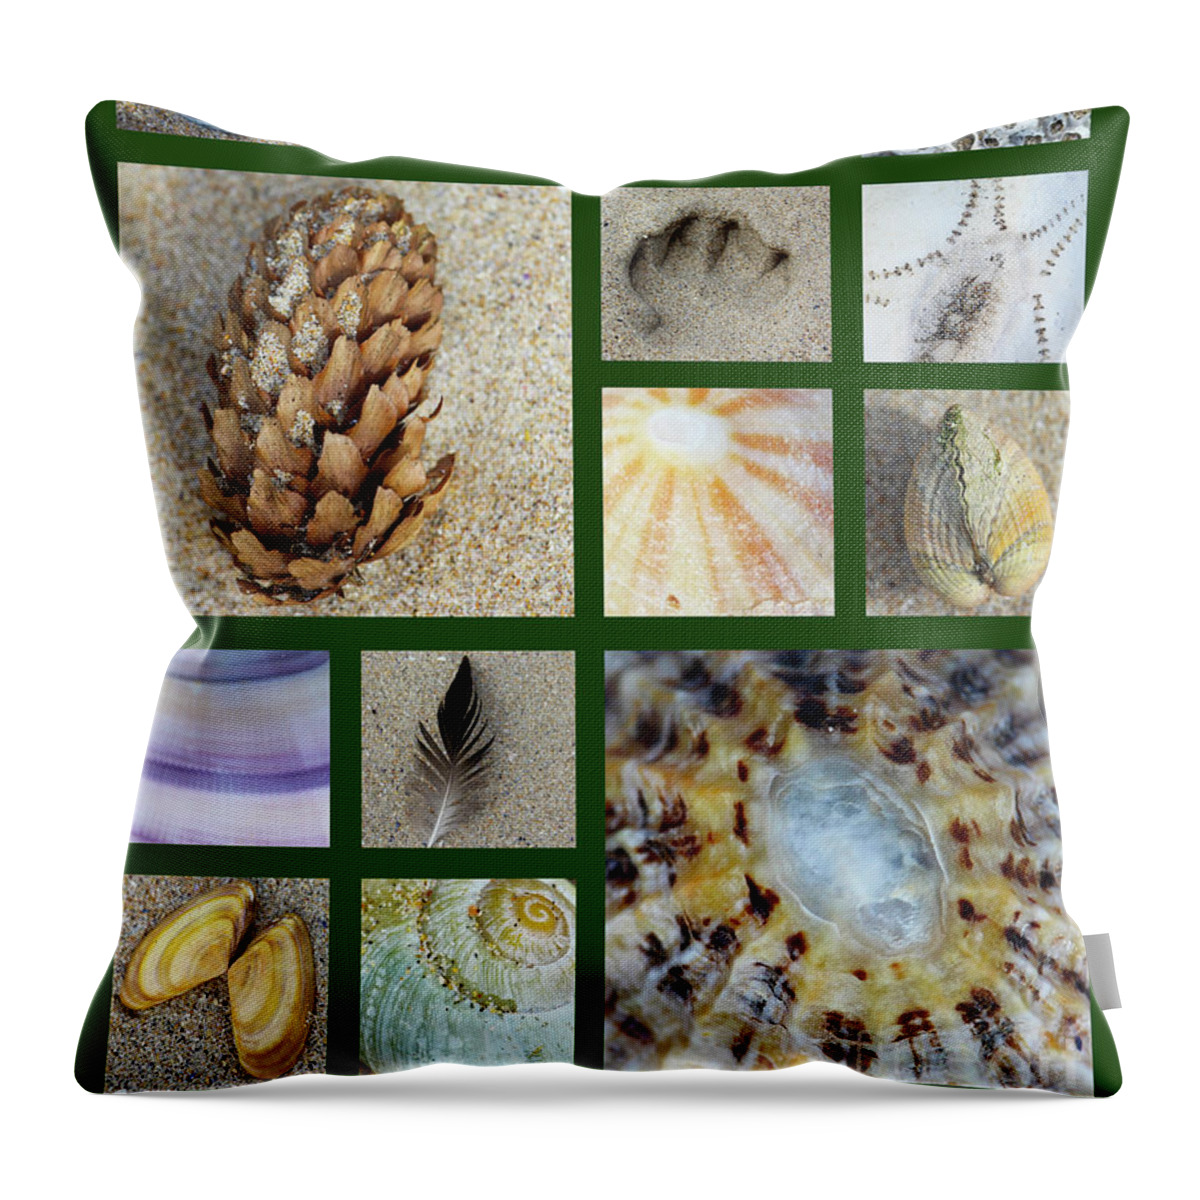 Ards Beach Throw Pillow featuring the photograph Ards Beach County Donegal Poster Ireland by Eddie Barron